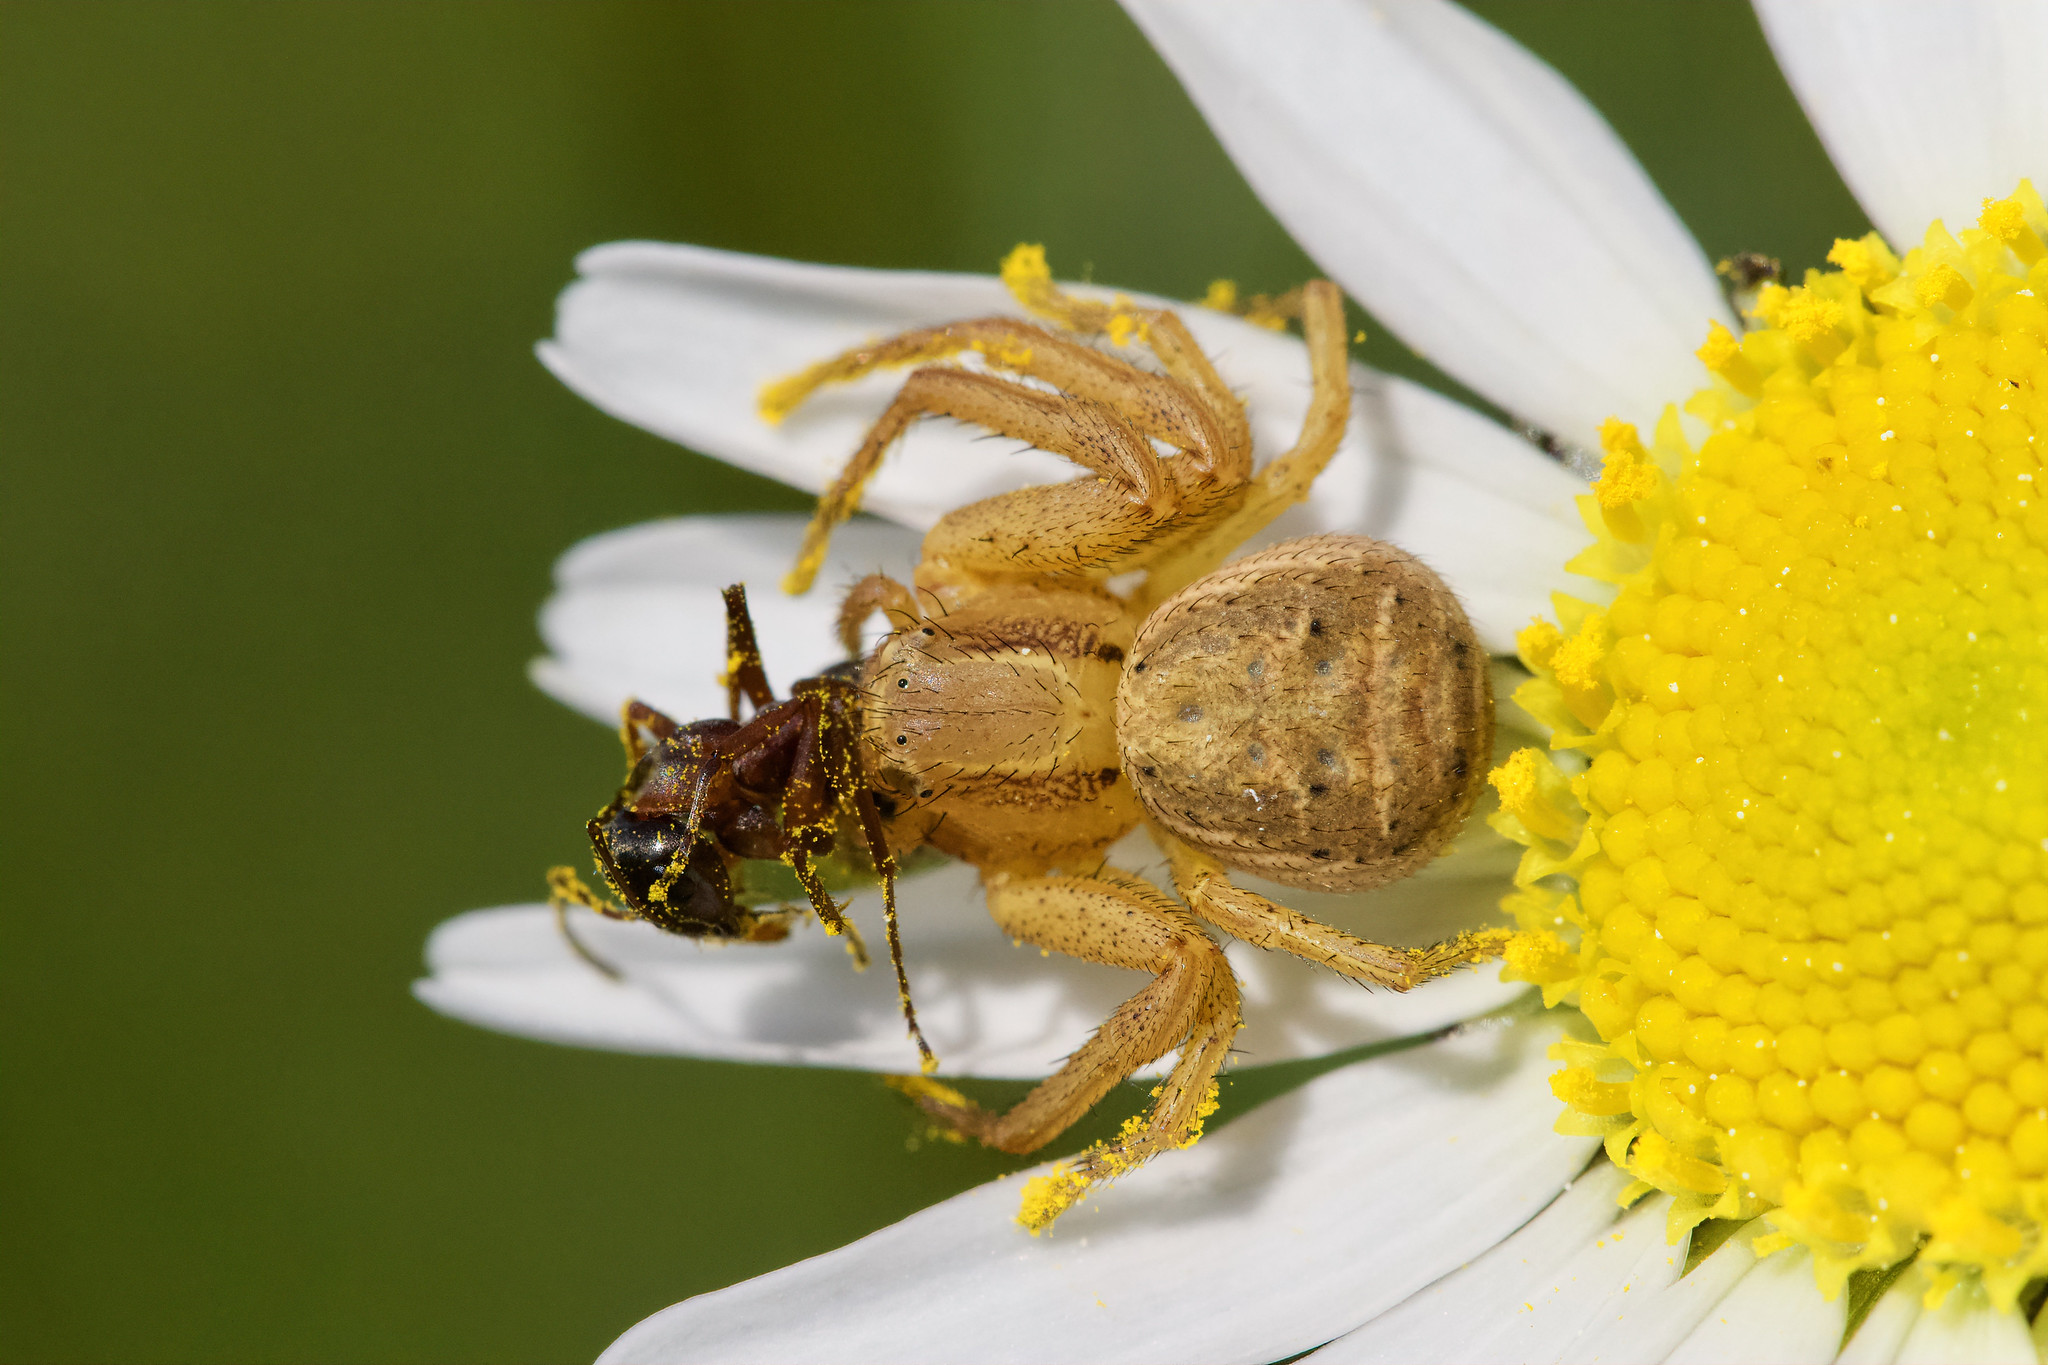 Crab spider (Thomisidae family) captured an Ant – Lengmoos, Upper Bavaria, Germany